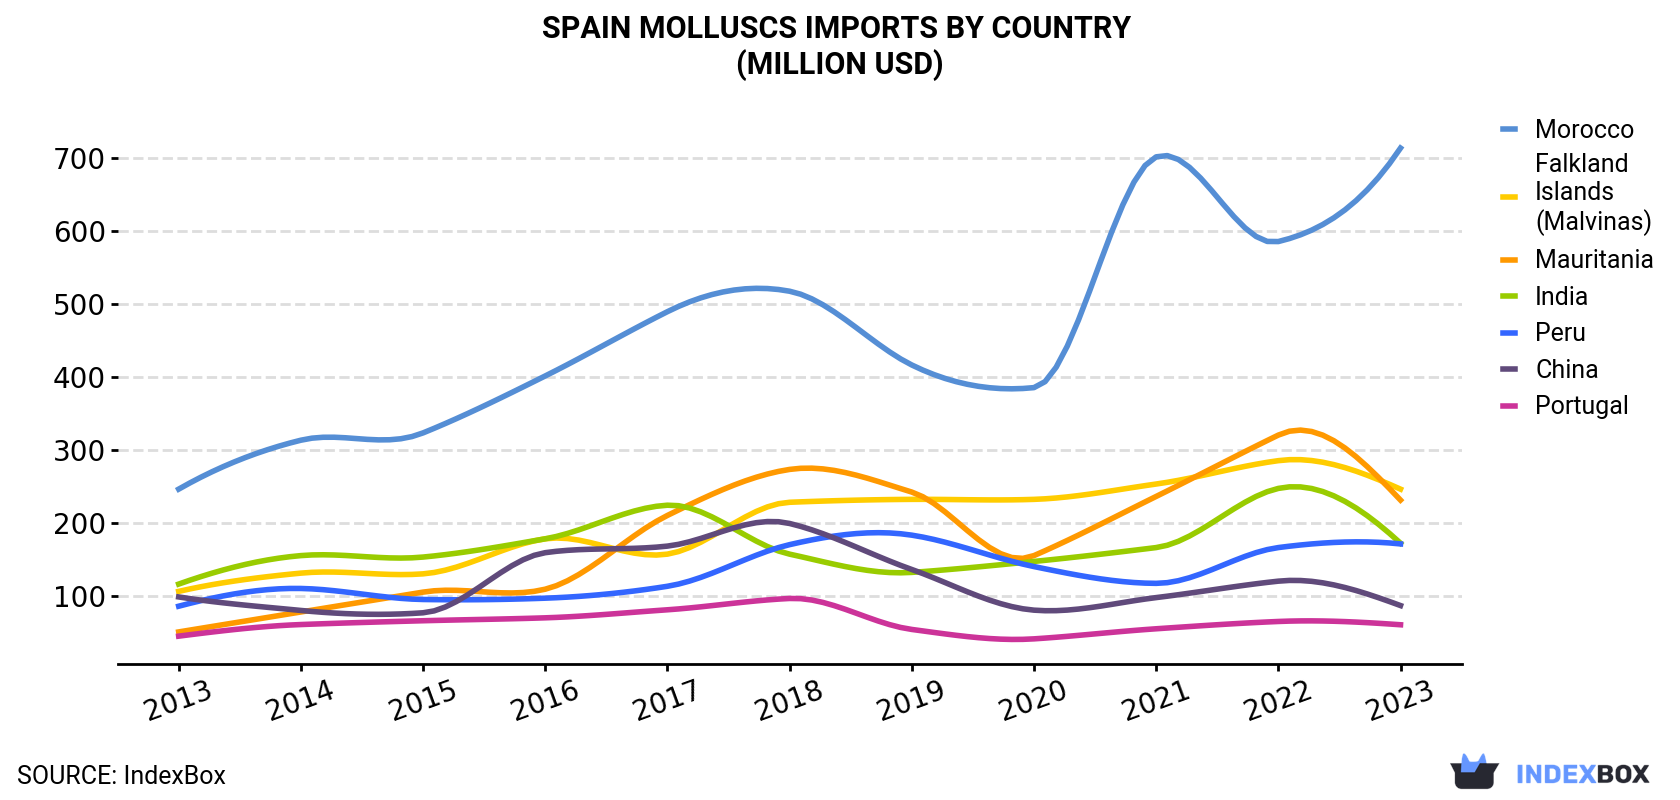 Spain Molluscs Imports By Country (Million USD)